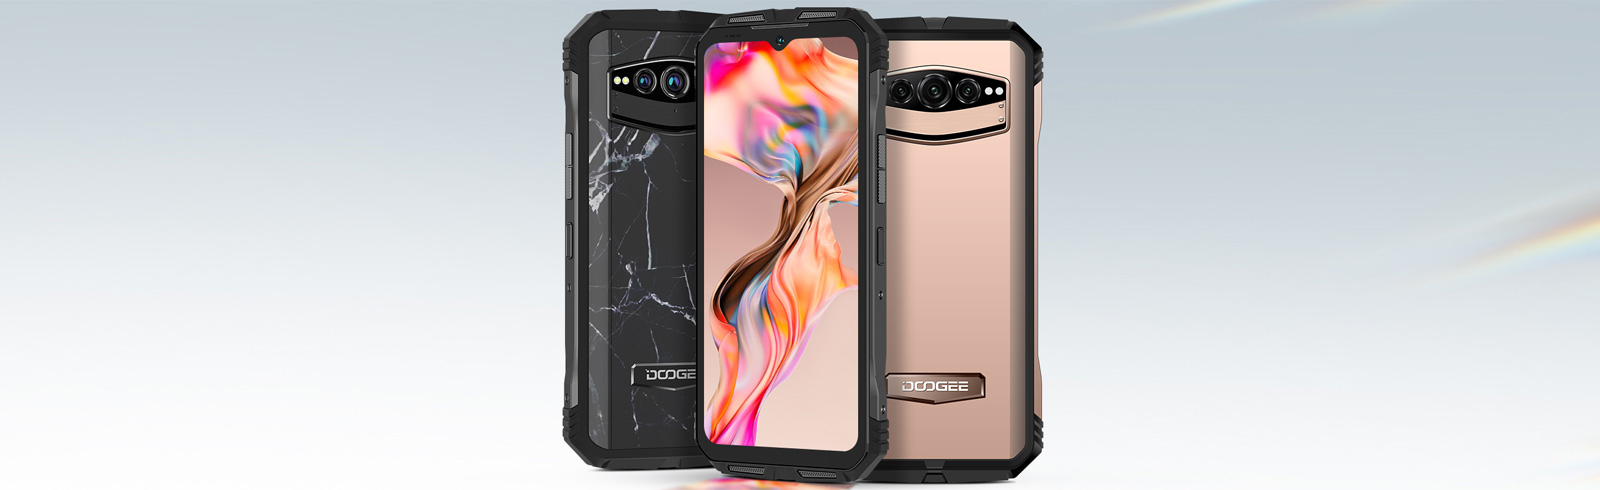 The Doogee V30T has been launched with a unique photochromic design